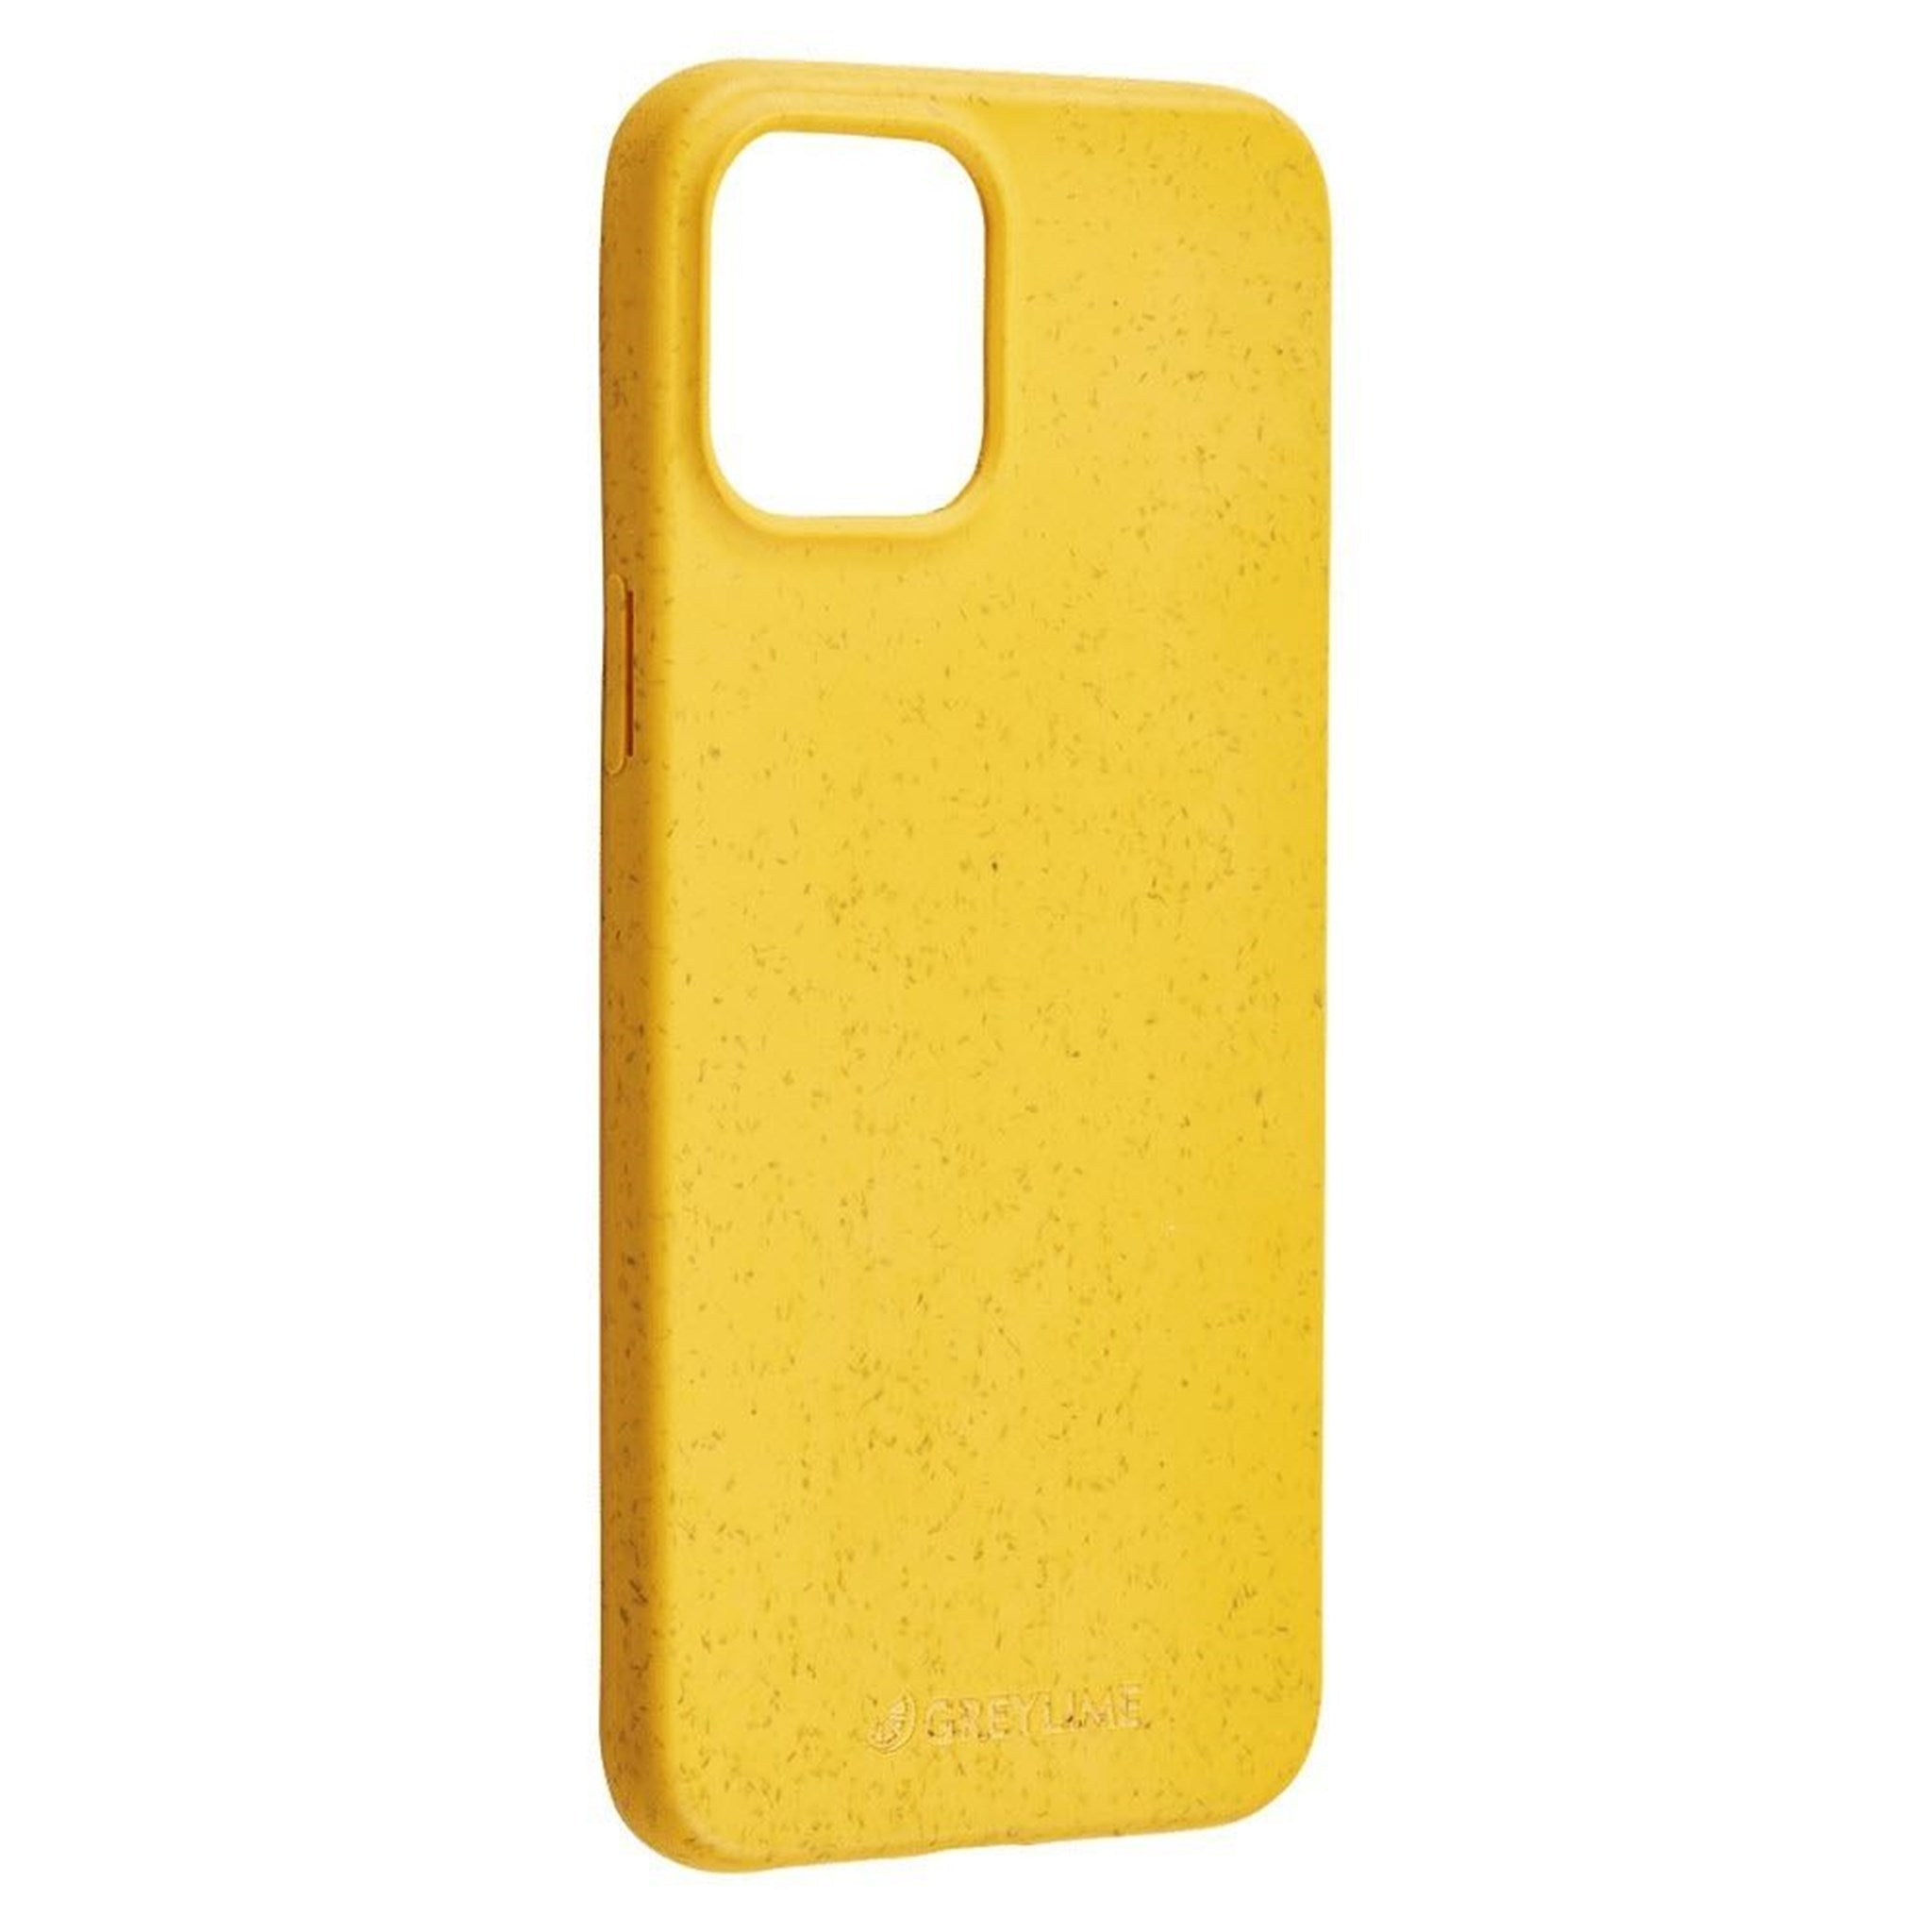 GreyLime-iPhone-12-Pro-Max-Biodegdrable-Cover-Yellow-COIP12L06-V1.jpg